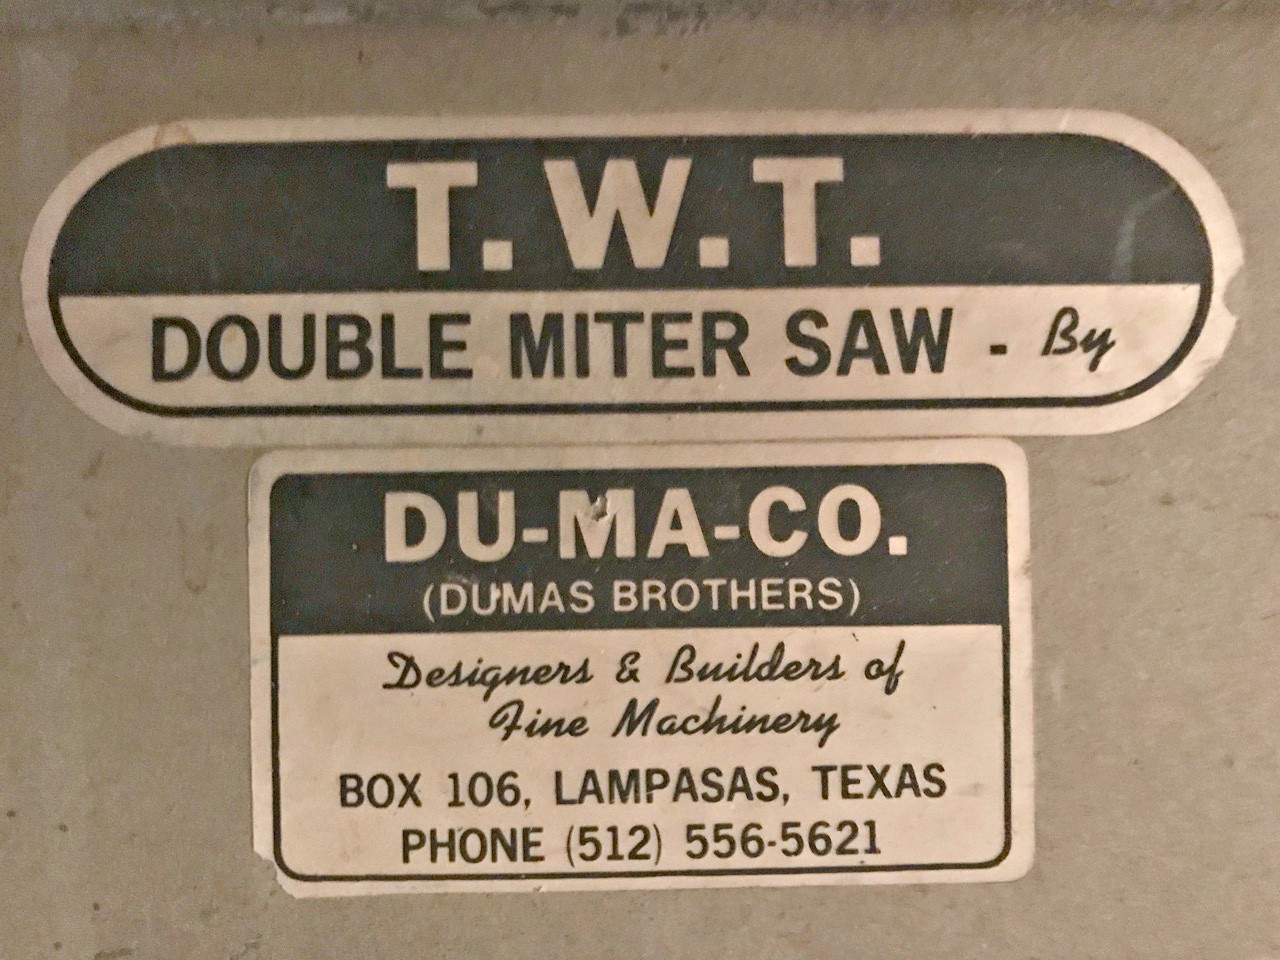 Ledsome TWT Double Mitre Saw (used) Item # UFE-3053 (TX)